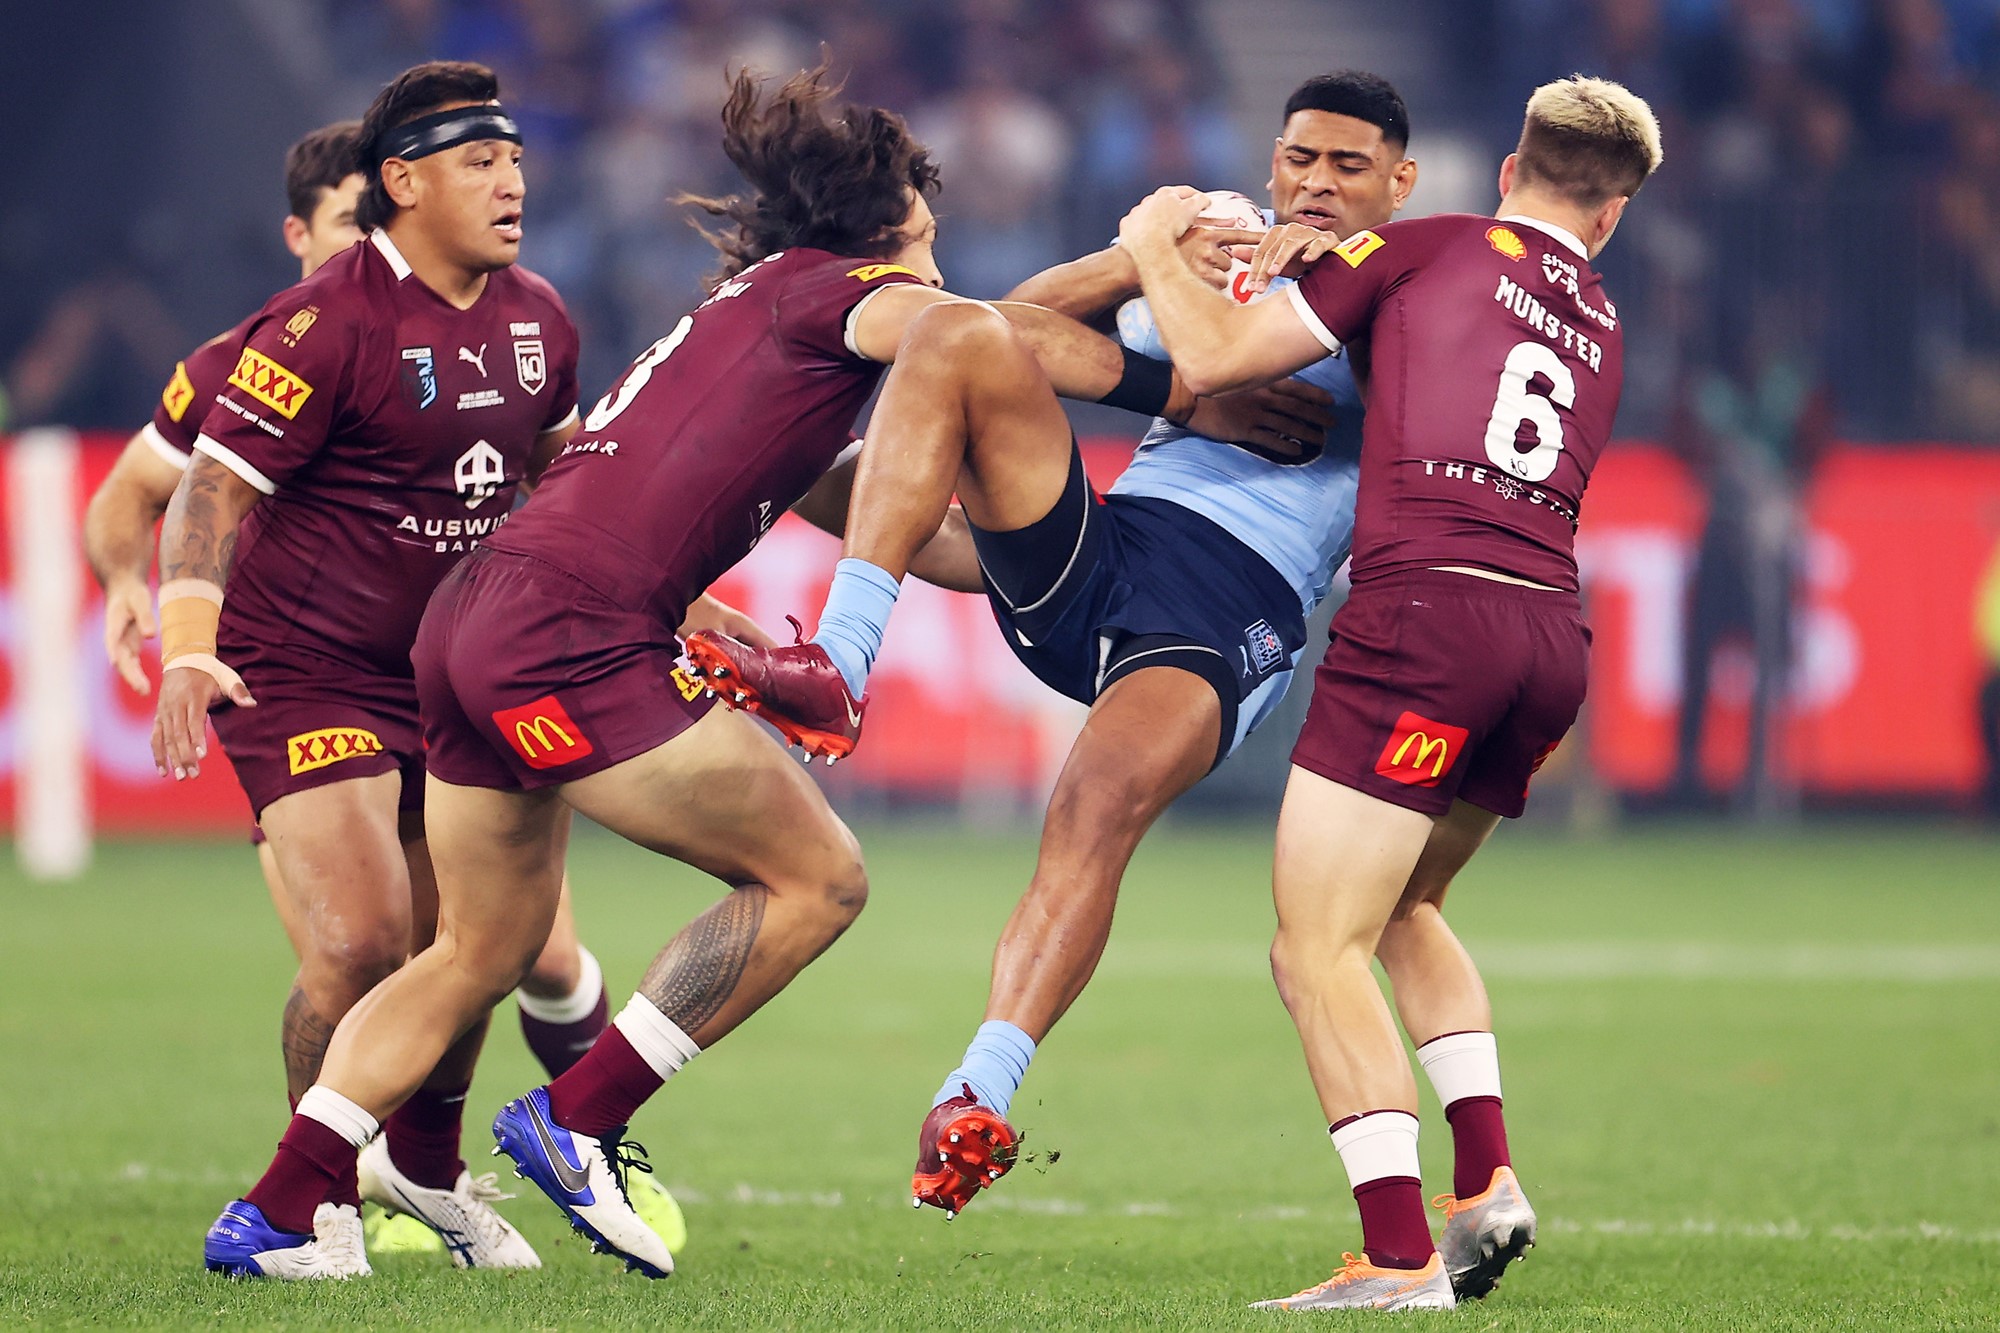 NSW Blues player Daniel Tupou is tackled by Cameron Munster and Tino Fa'asuamaleaui of the Queensland Maroons.